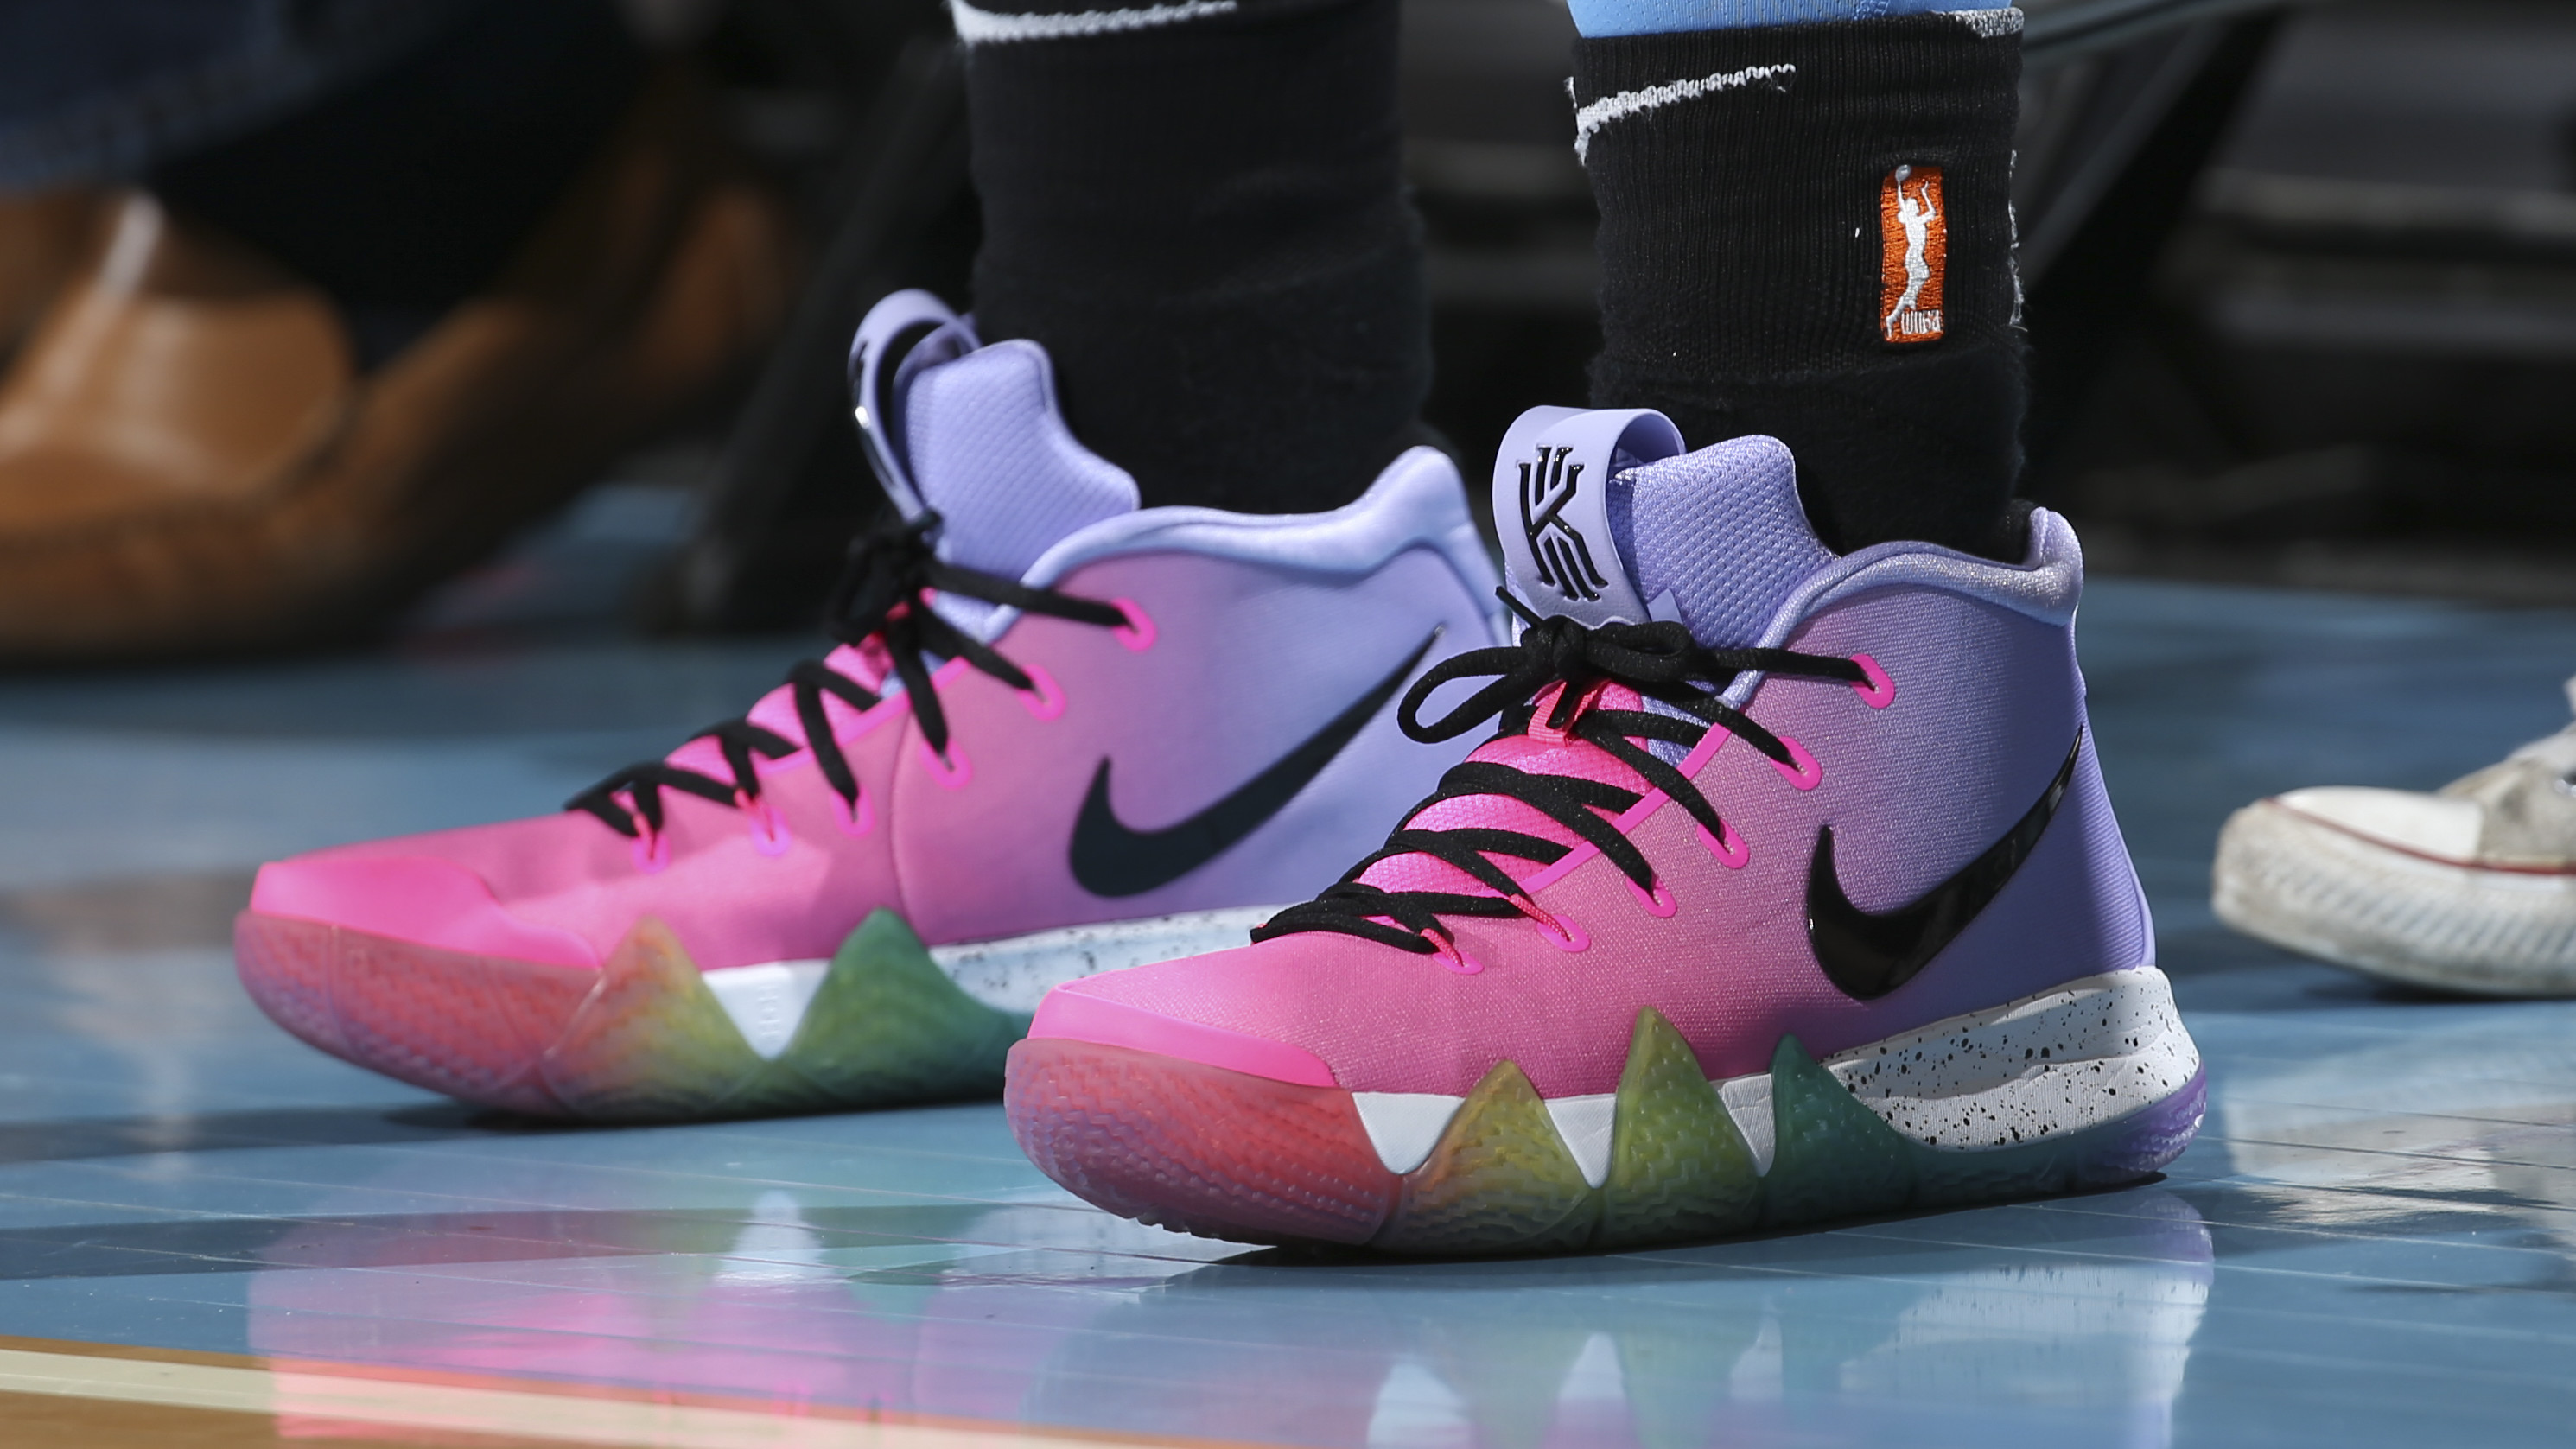 Nike Kyrie 4s Get the 'Be True' Treatment | Complex